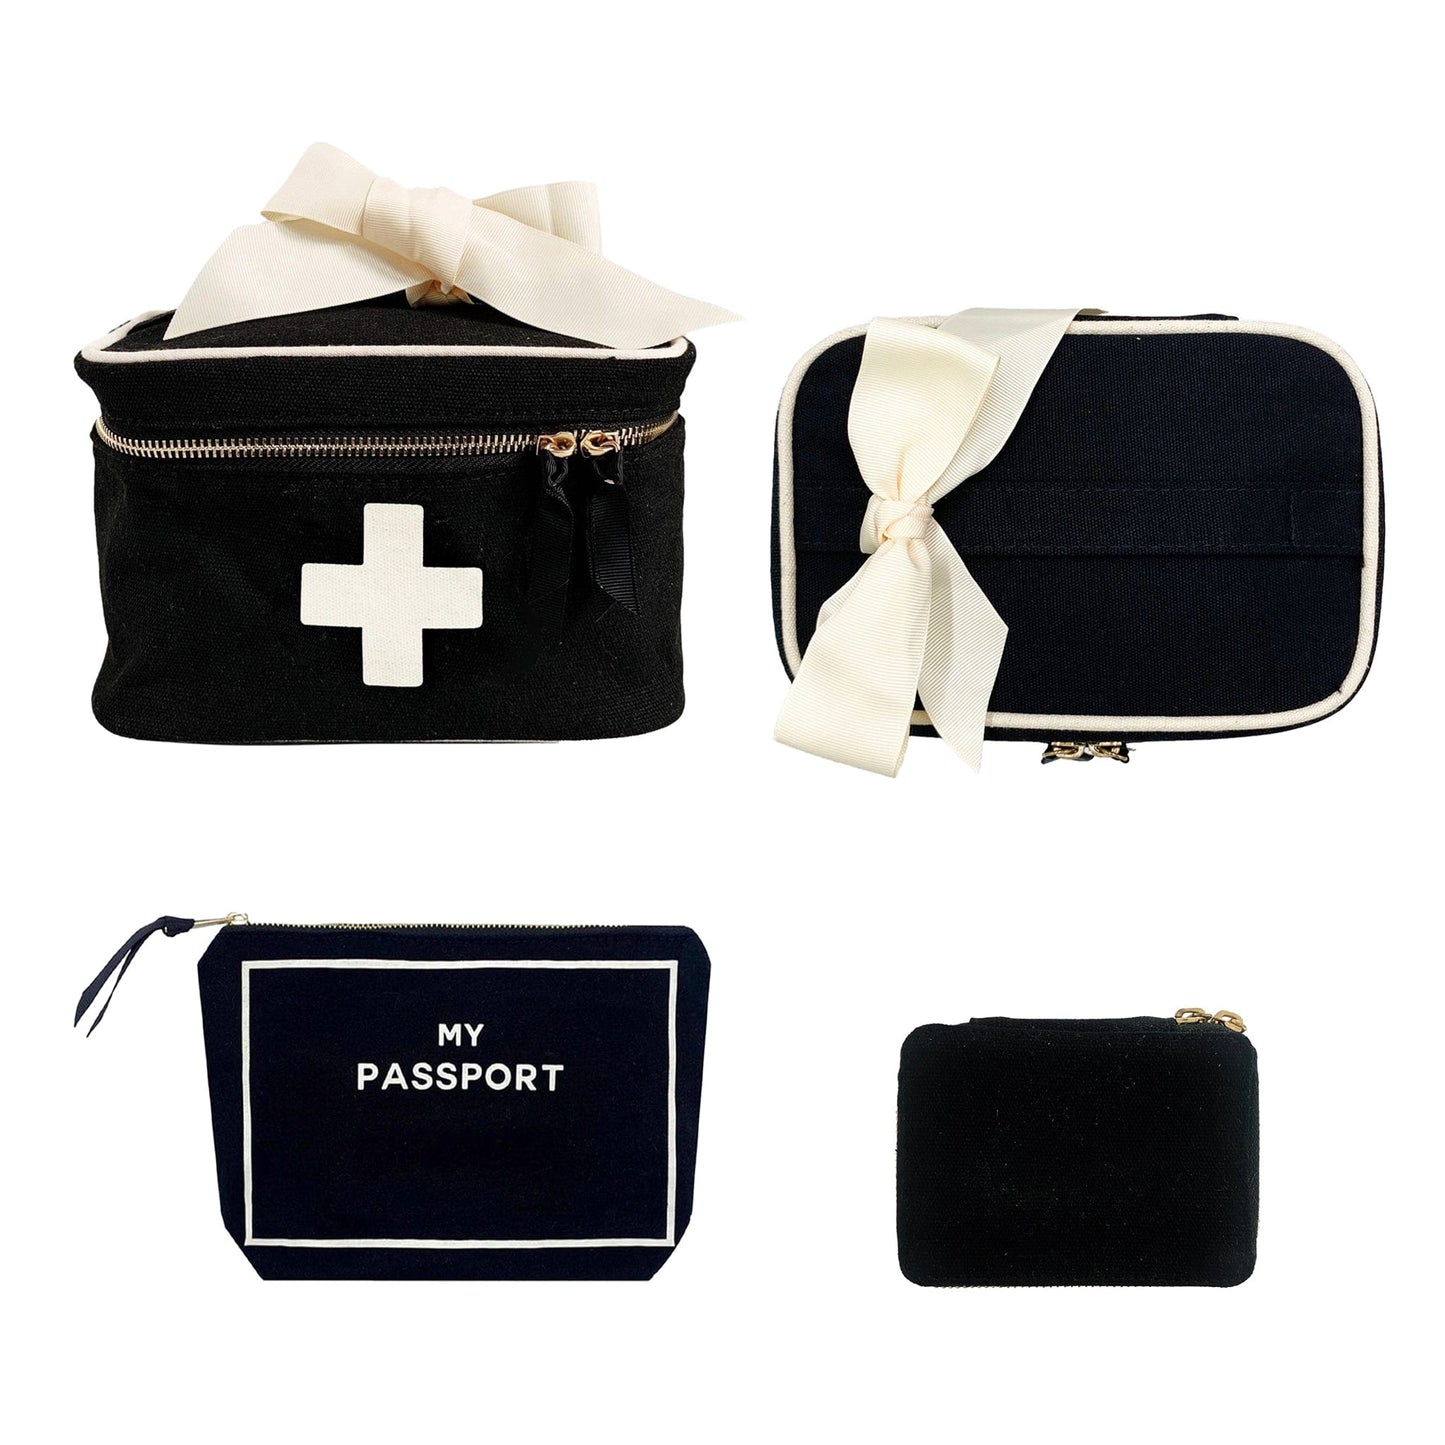 First Aid Travel Gift Set Deal 3-Pack, Black | Bag-all Europe